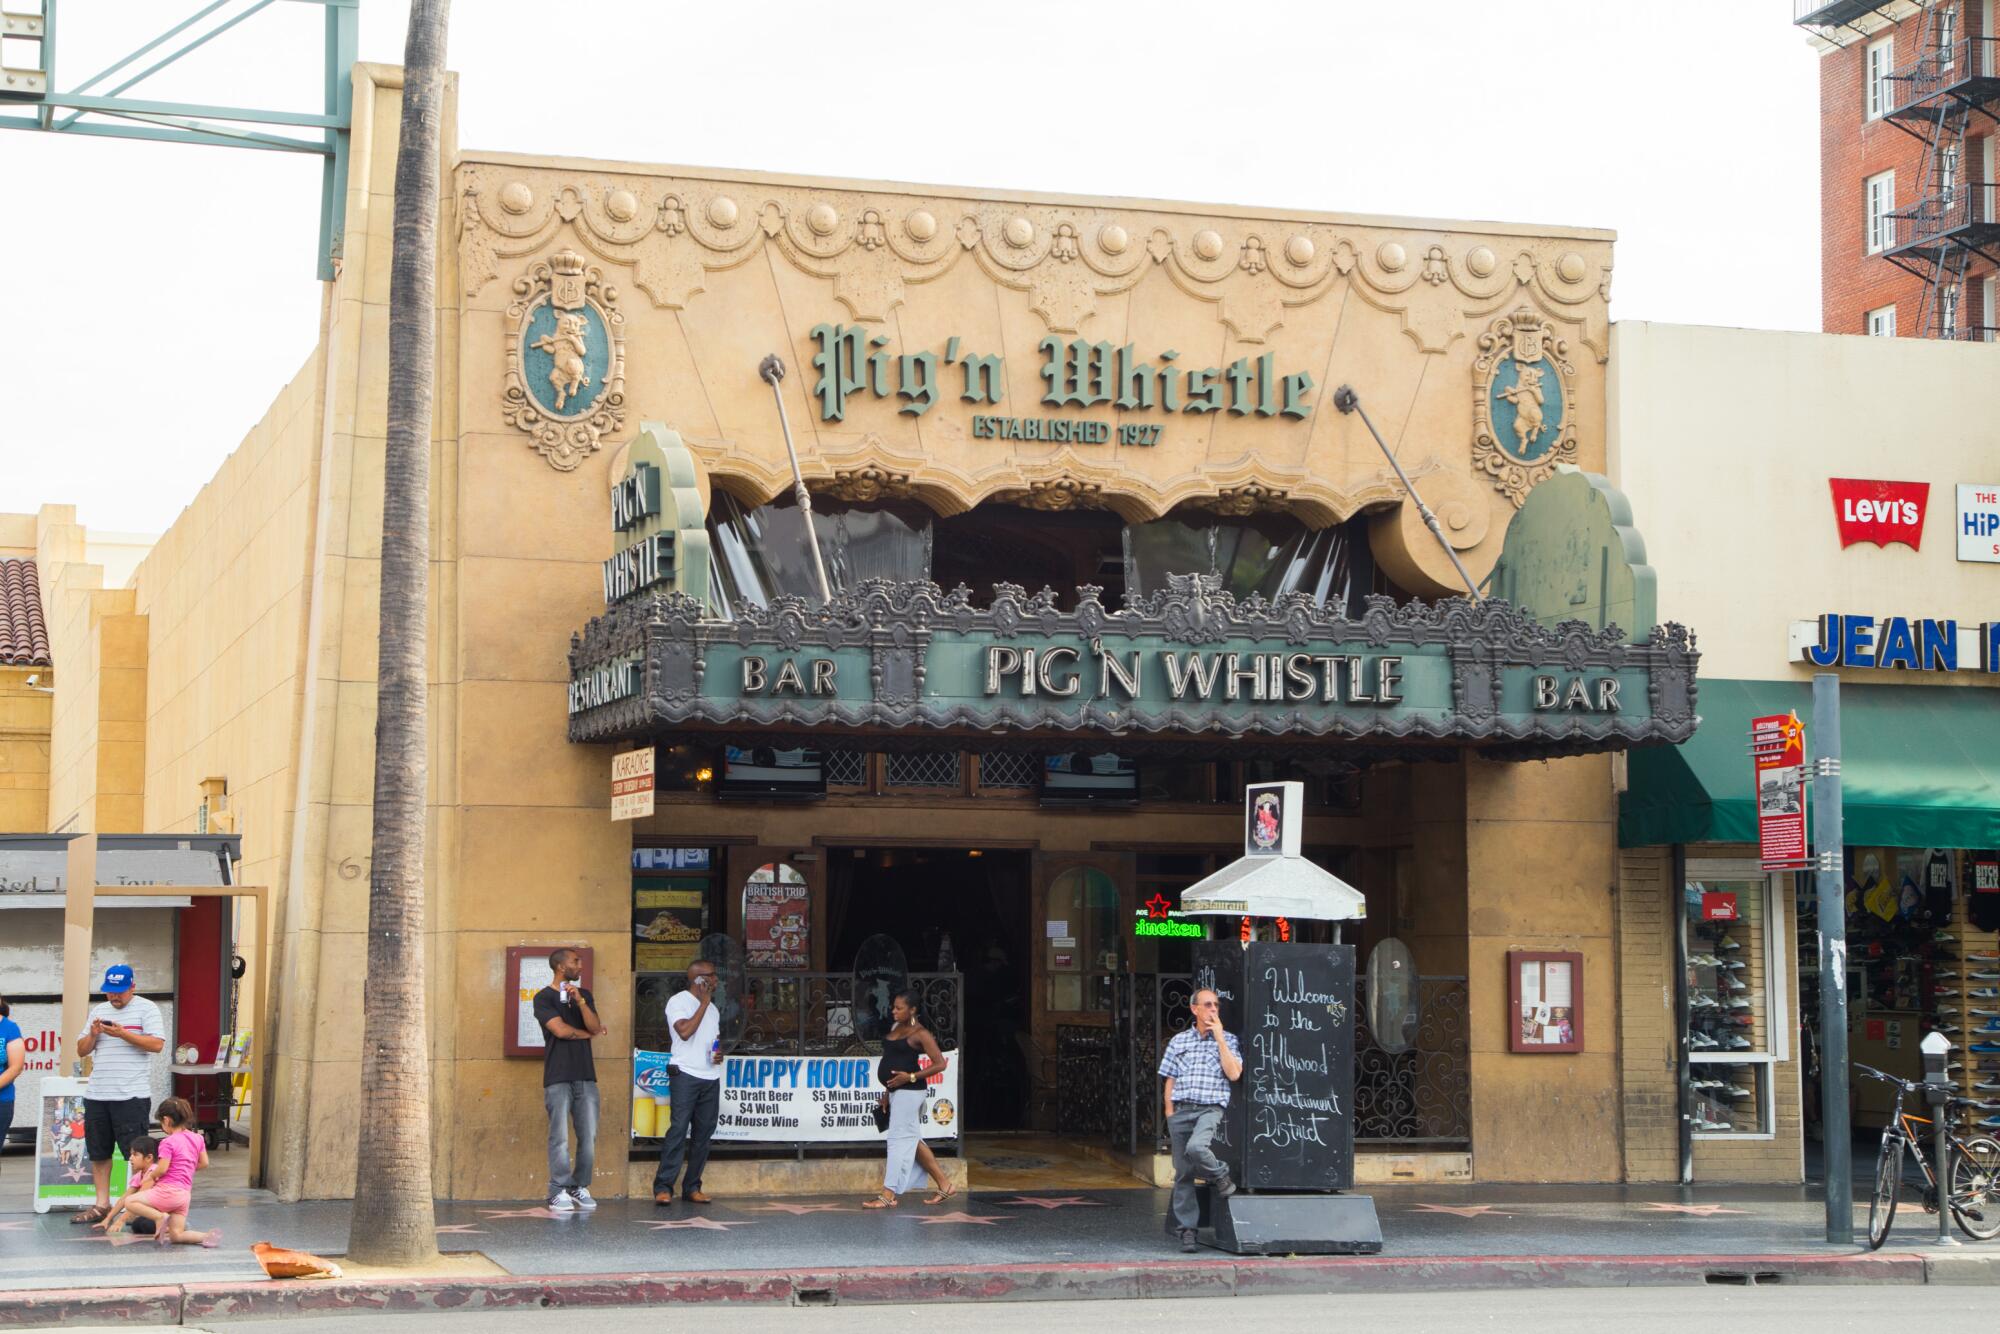 The Pig ’N Whistle bar on the Hollywood Walk of Fame